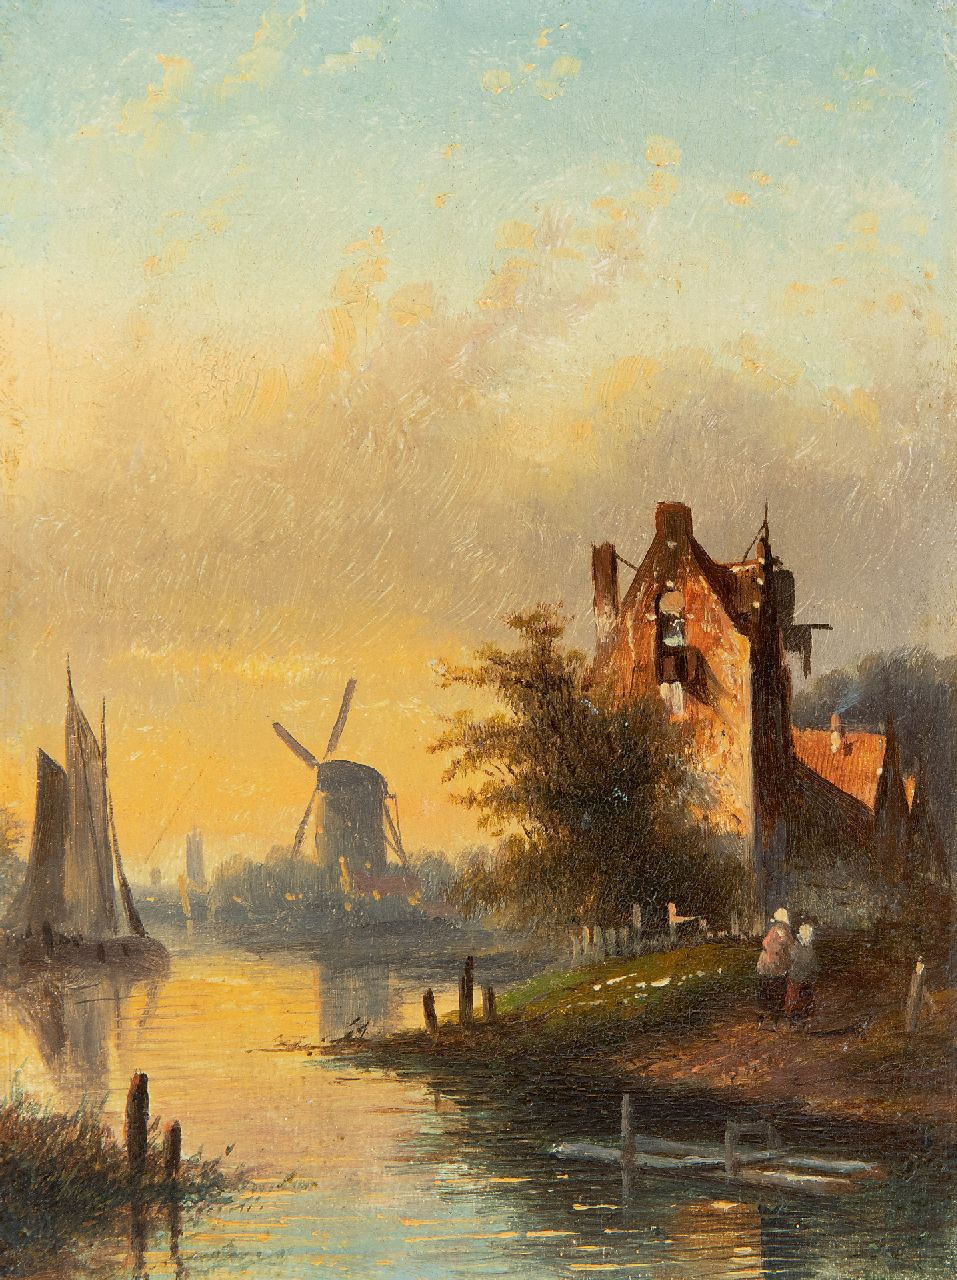 Spohler J.J.C.  | Jacob Jan Coenraad Spohler | Paintings offered for sale | River landscape with sailing ship, figures and windmill, oil on panel 16.0 x 11.9 cm